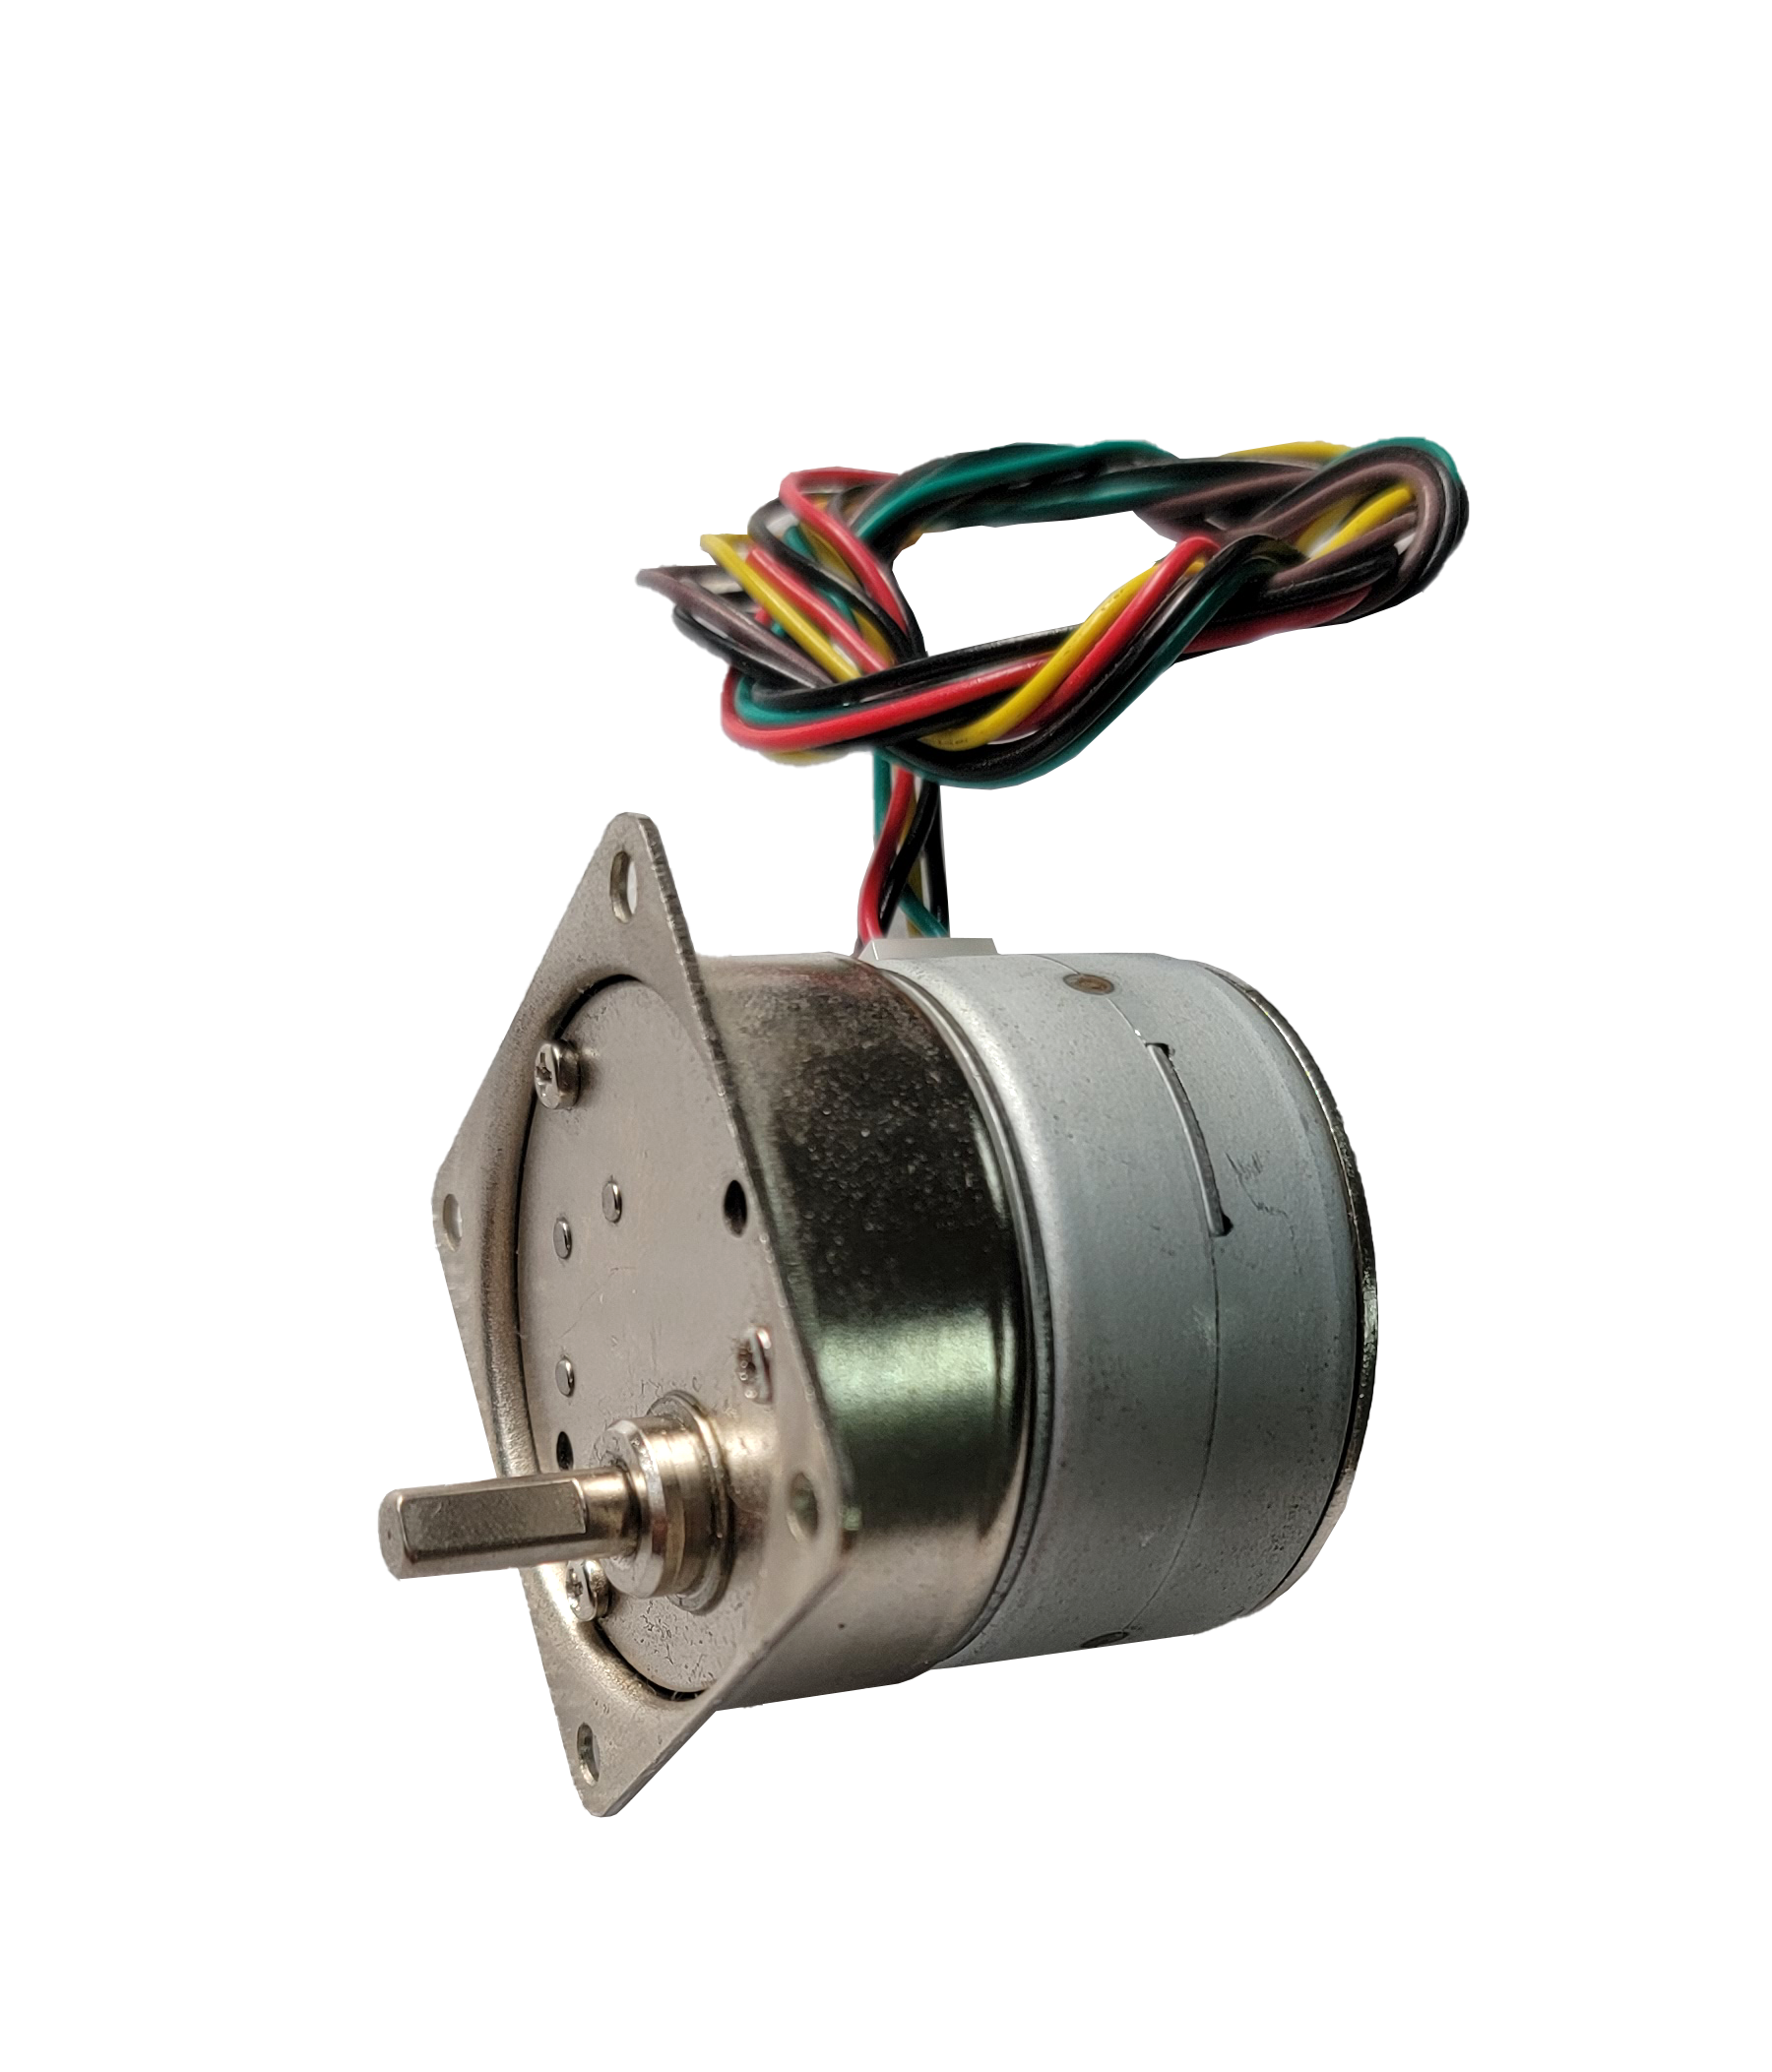 wholesale Spindle Motor –  BG42-BS42M-50 42mm PM stepper motor 2/4  phases with gear ratio of 1:50 – Bobet